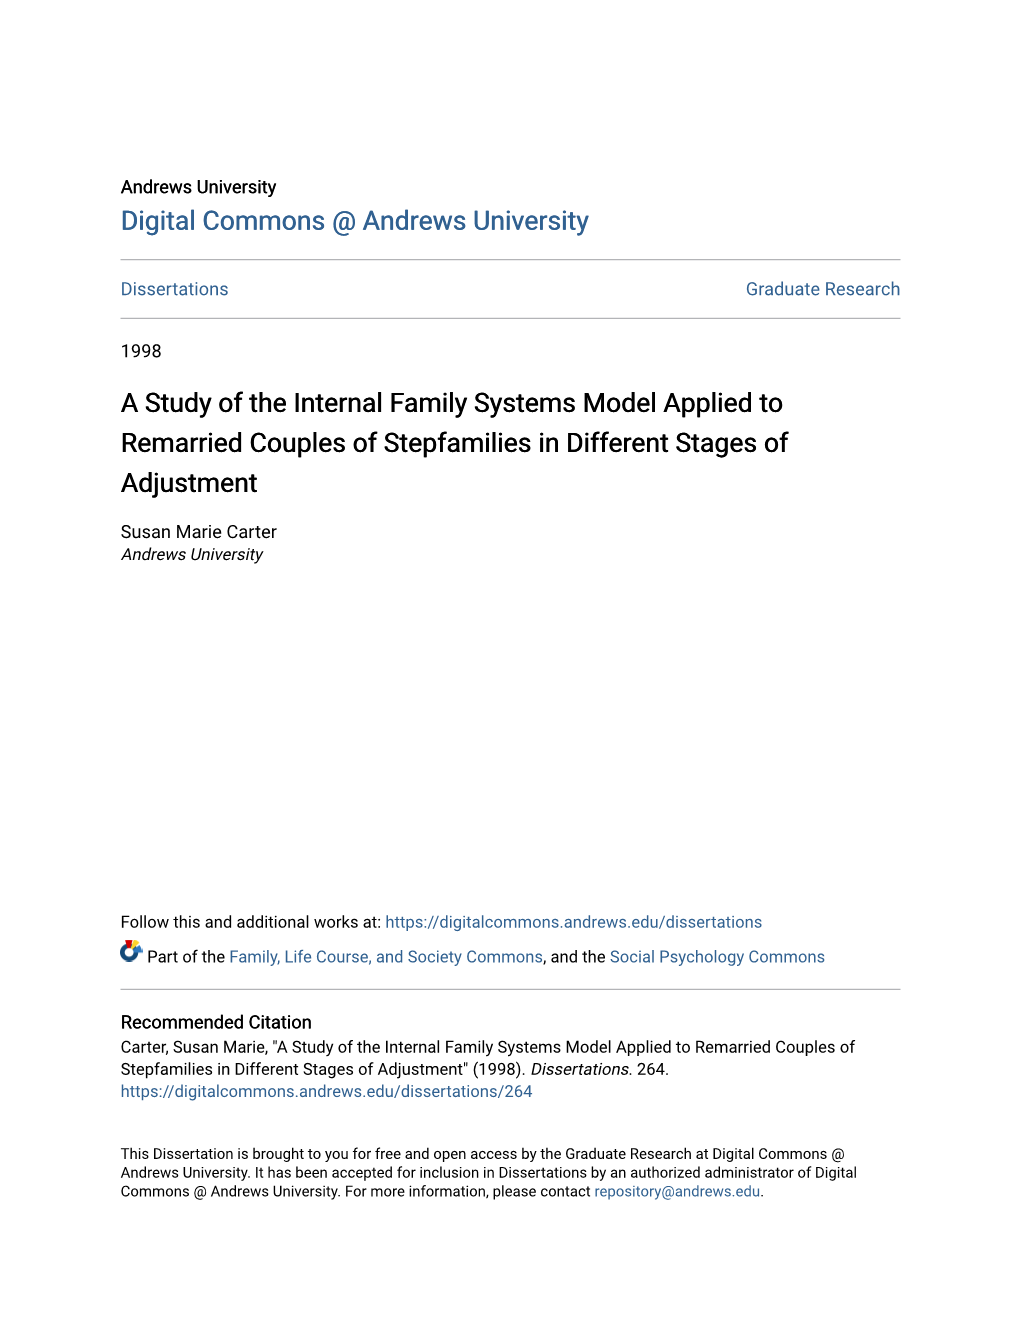 A Study of the Internal Family Systems Model Applied to Remarried Couples of Stepfamilies in Different Stages of Adjustment